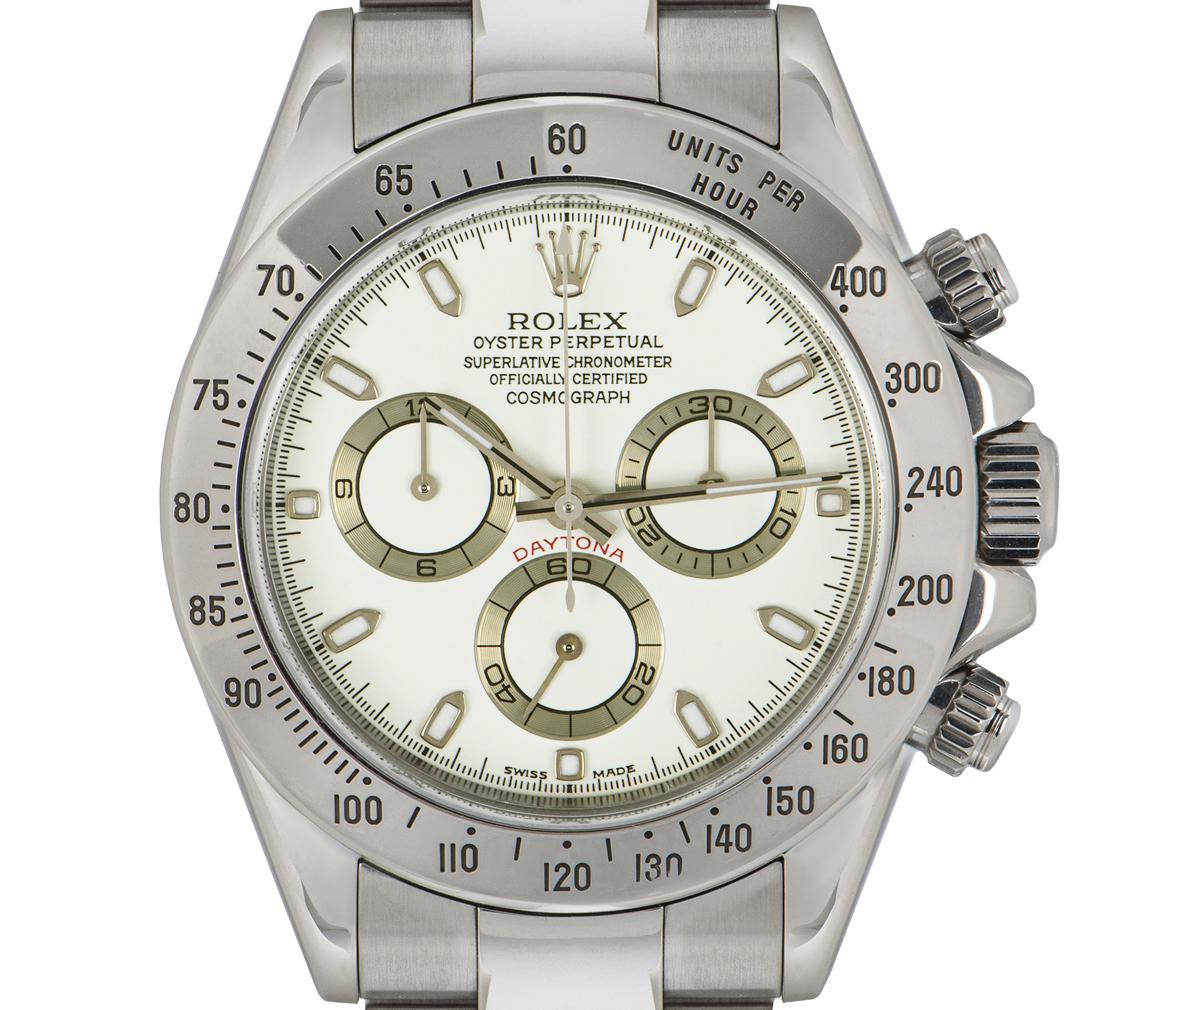 A men's wristwatch in stainless steel, by Rolex. Featuring an extremely desirable yet rare Panna cream dial, found only in a fairly tight serial range. With an engraved tachymetric scale, three counters and pushers; the Daytona was designed to be